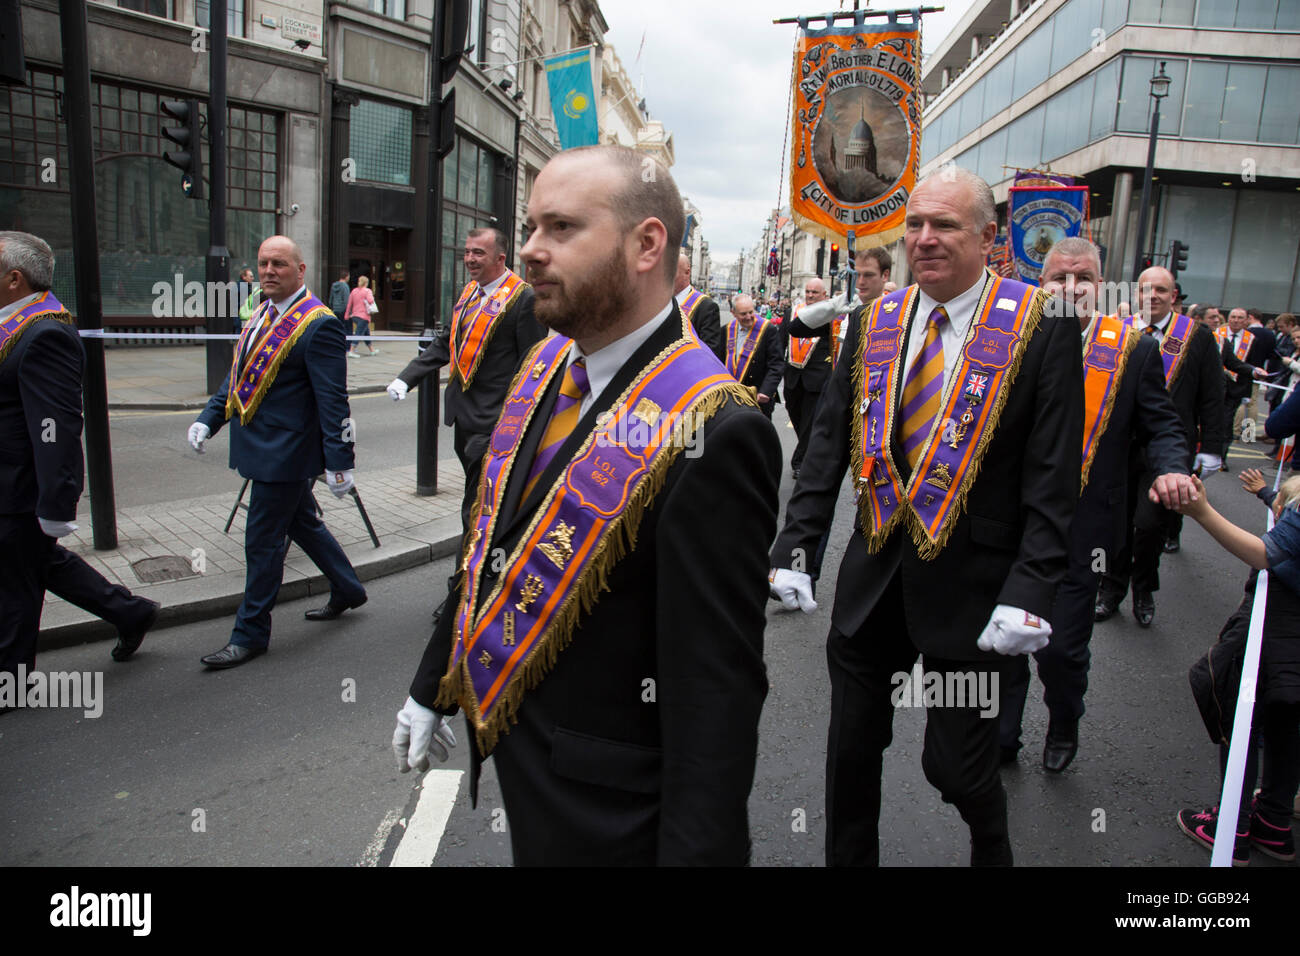 Orangemen from the Grand Orange Lodge of England, Parade to mark H.M. The Queen’s 90th Birthday on June 16th 2016 in London, United Kingdom. The Loyal Orange Institution, more commonly known as the Orange Order, is a Protestant fraternal organisation based primarily in Northern Ireland. Stock Photo